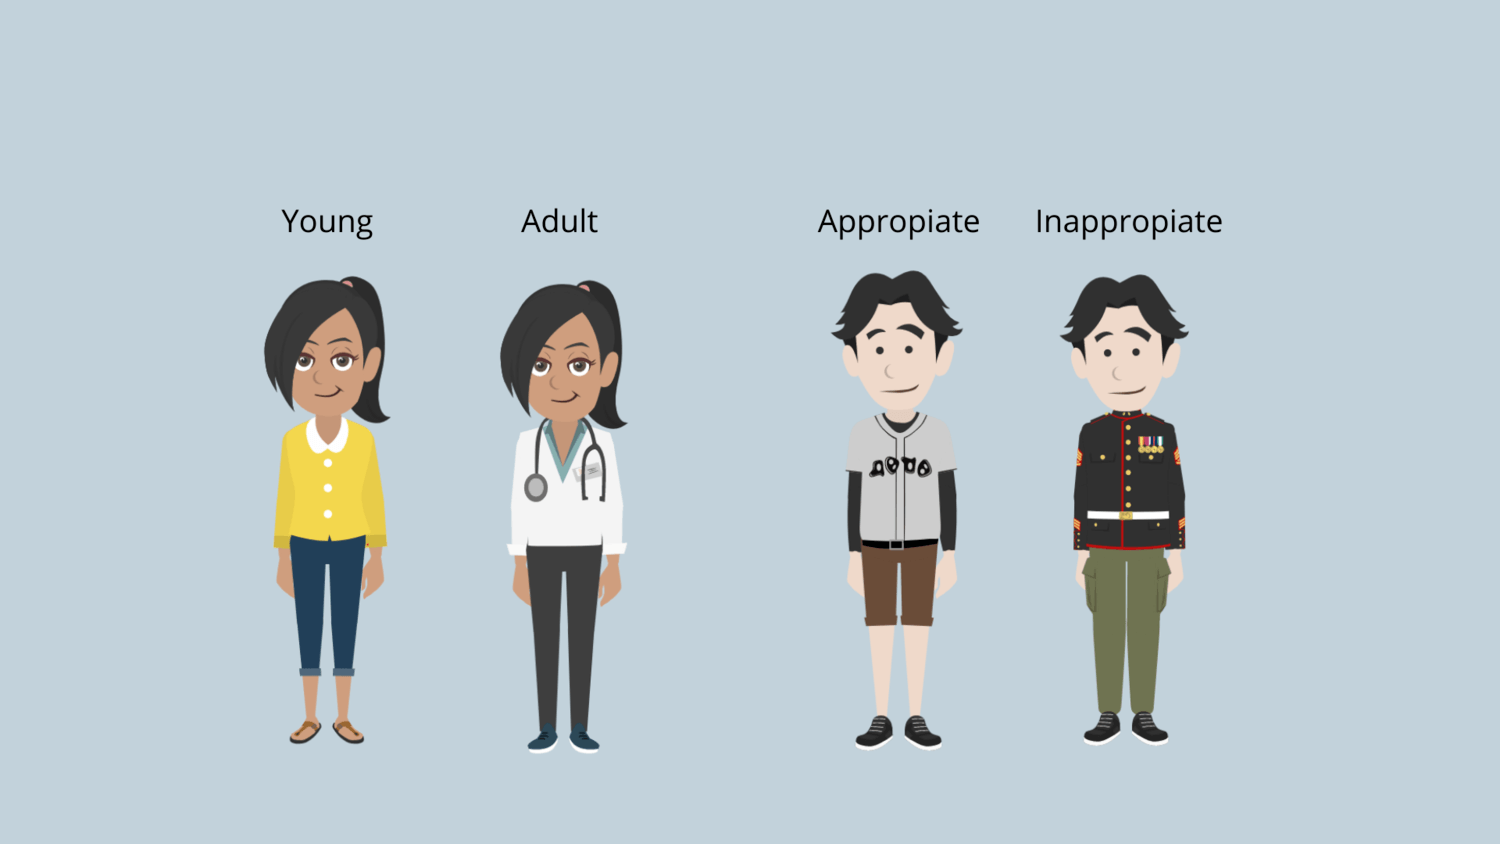 How To Represent Different Ages in Vyond | Vyond